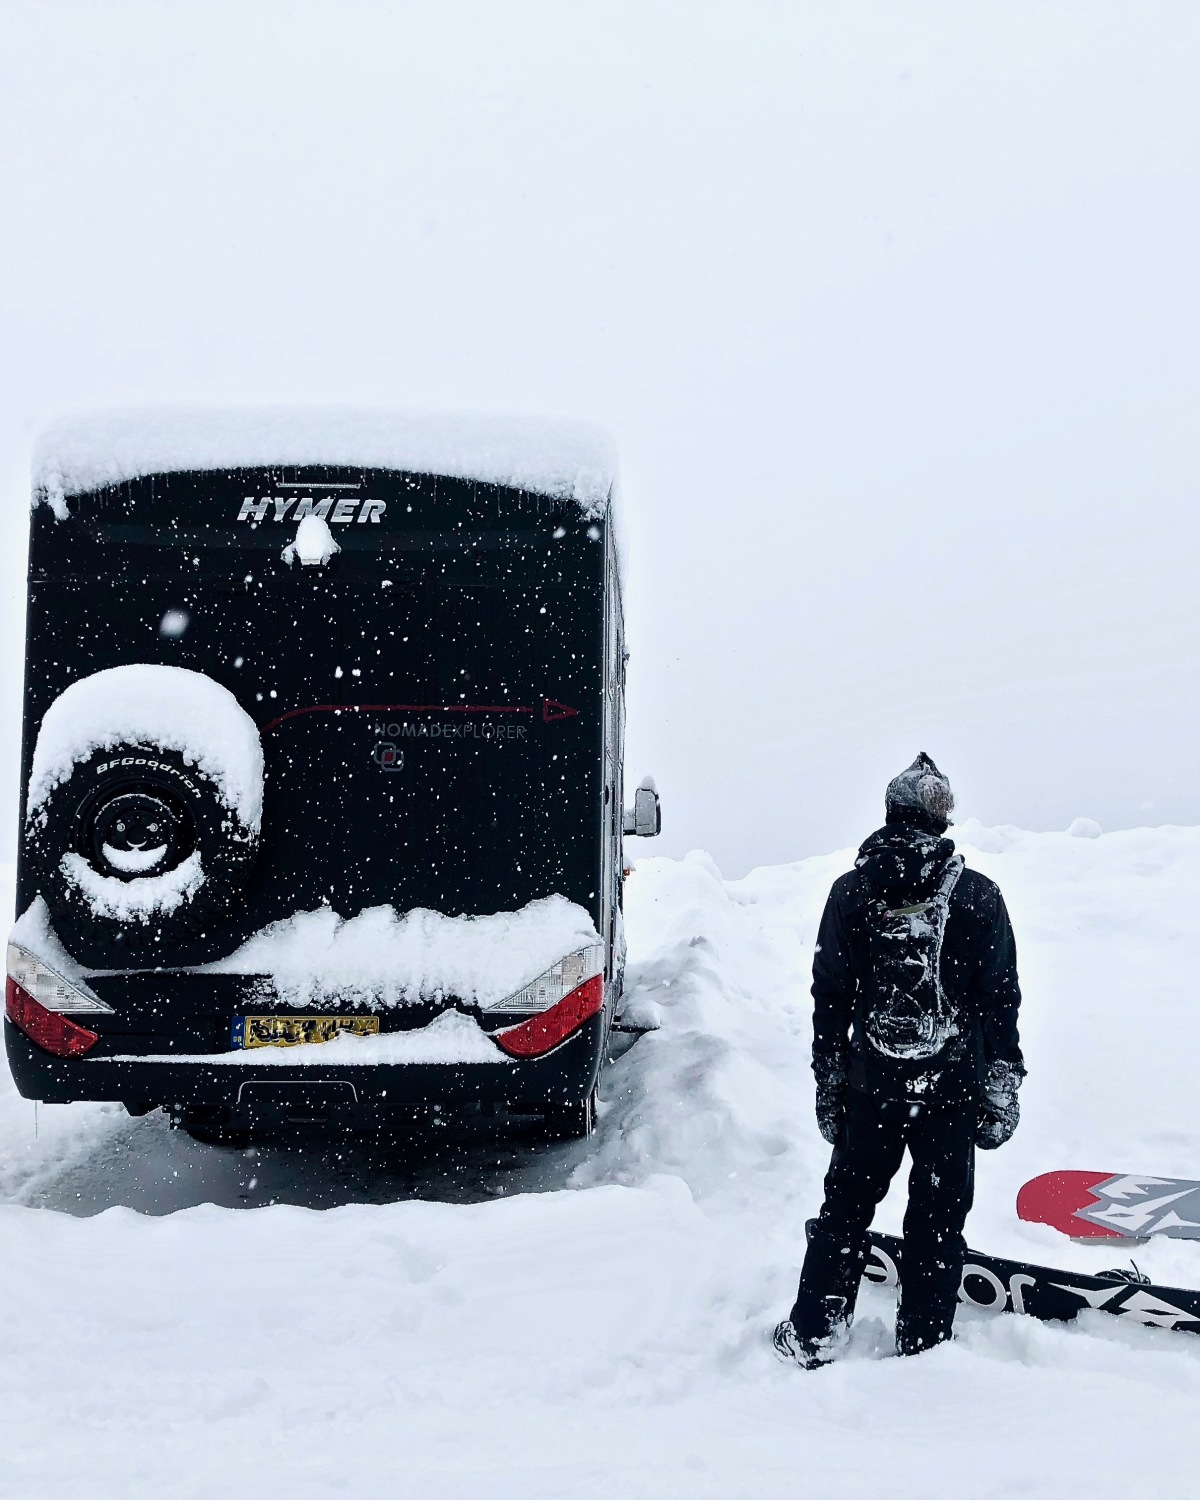 4x4 Hymer motorhome Winter in the mountains